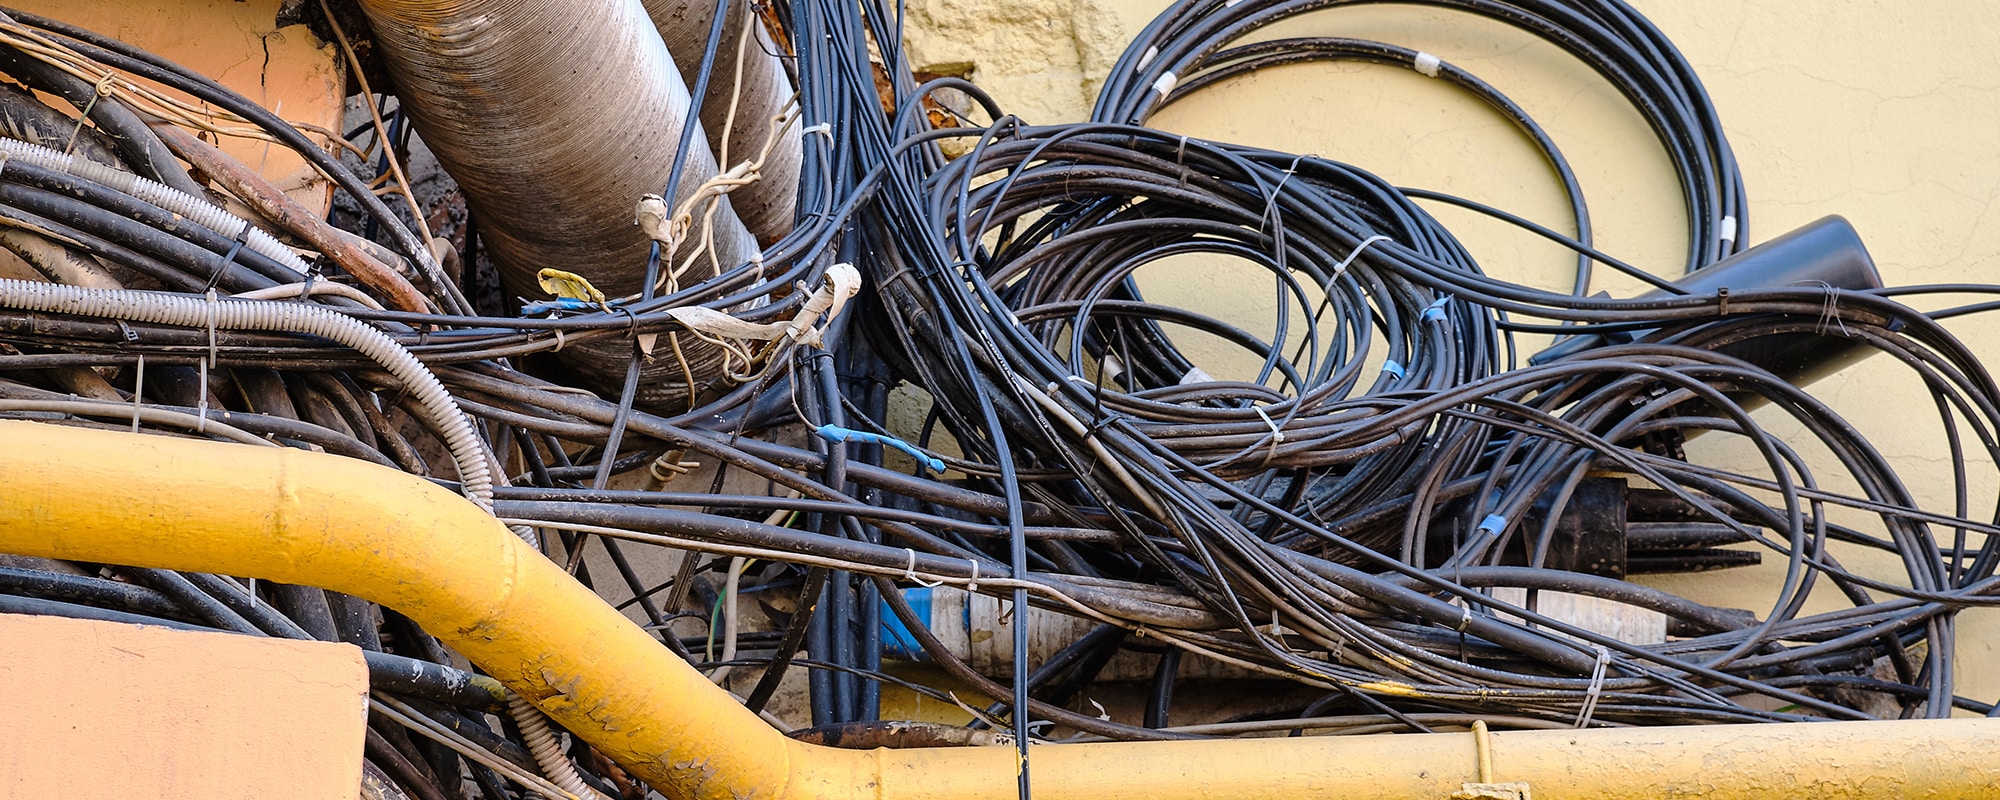 Bundles of black cables intertwined with yellow and silver colored, dusty, rusting pipes in an outdoor setting. 